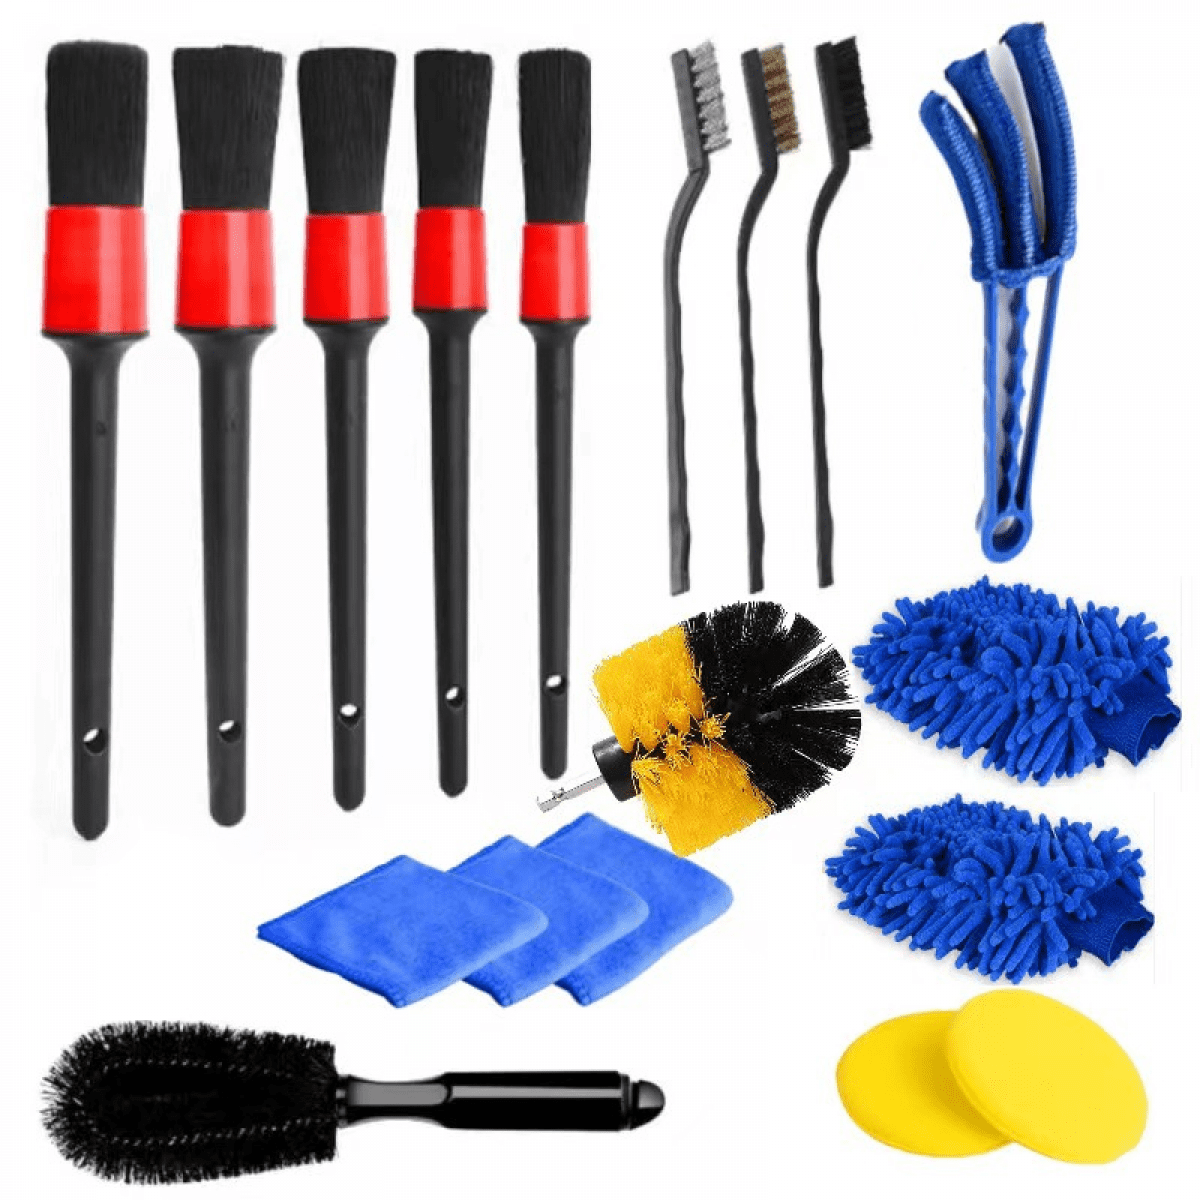 MateAuto Car Detailing Brush Set,20pcs Drill Brush Set,Car Interior Detailing Kit & Car Wash Kit with Boar Hair Detail Brush and Cleaning Gel for